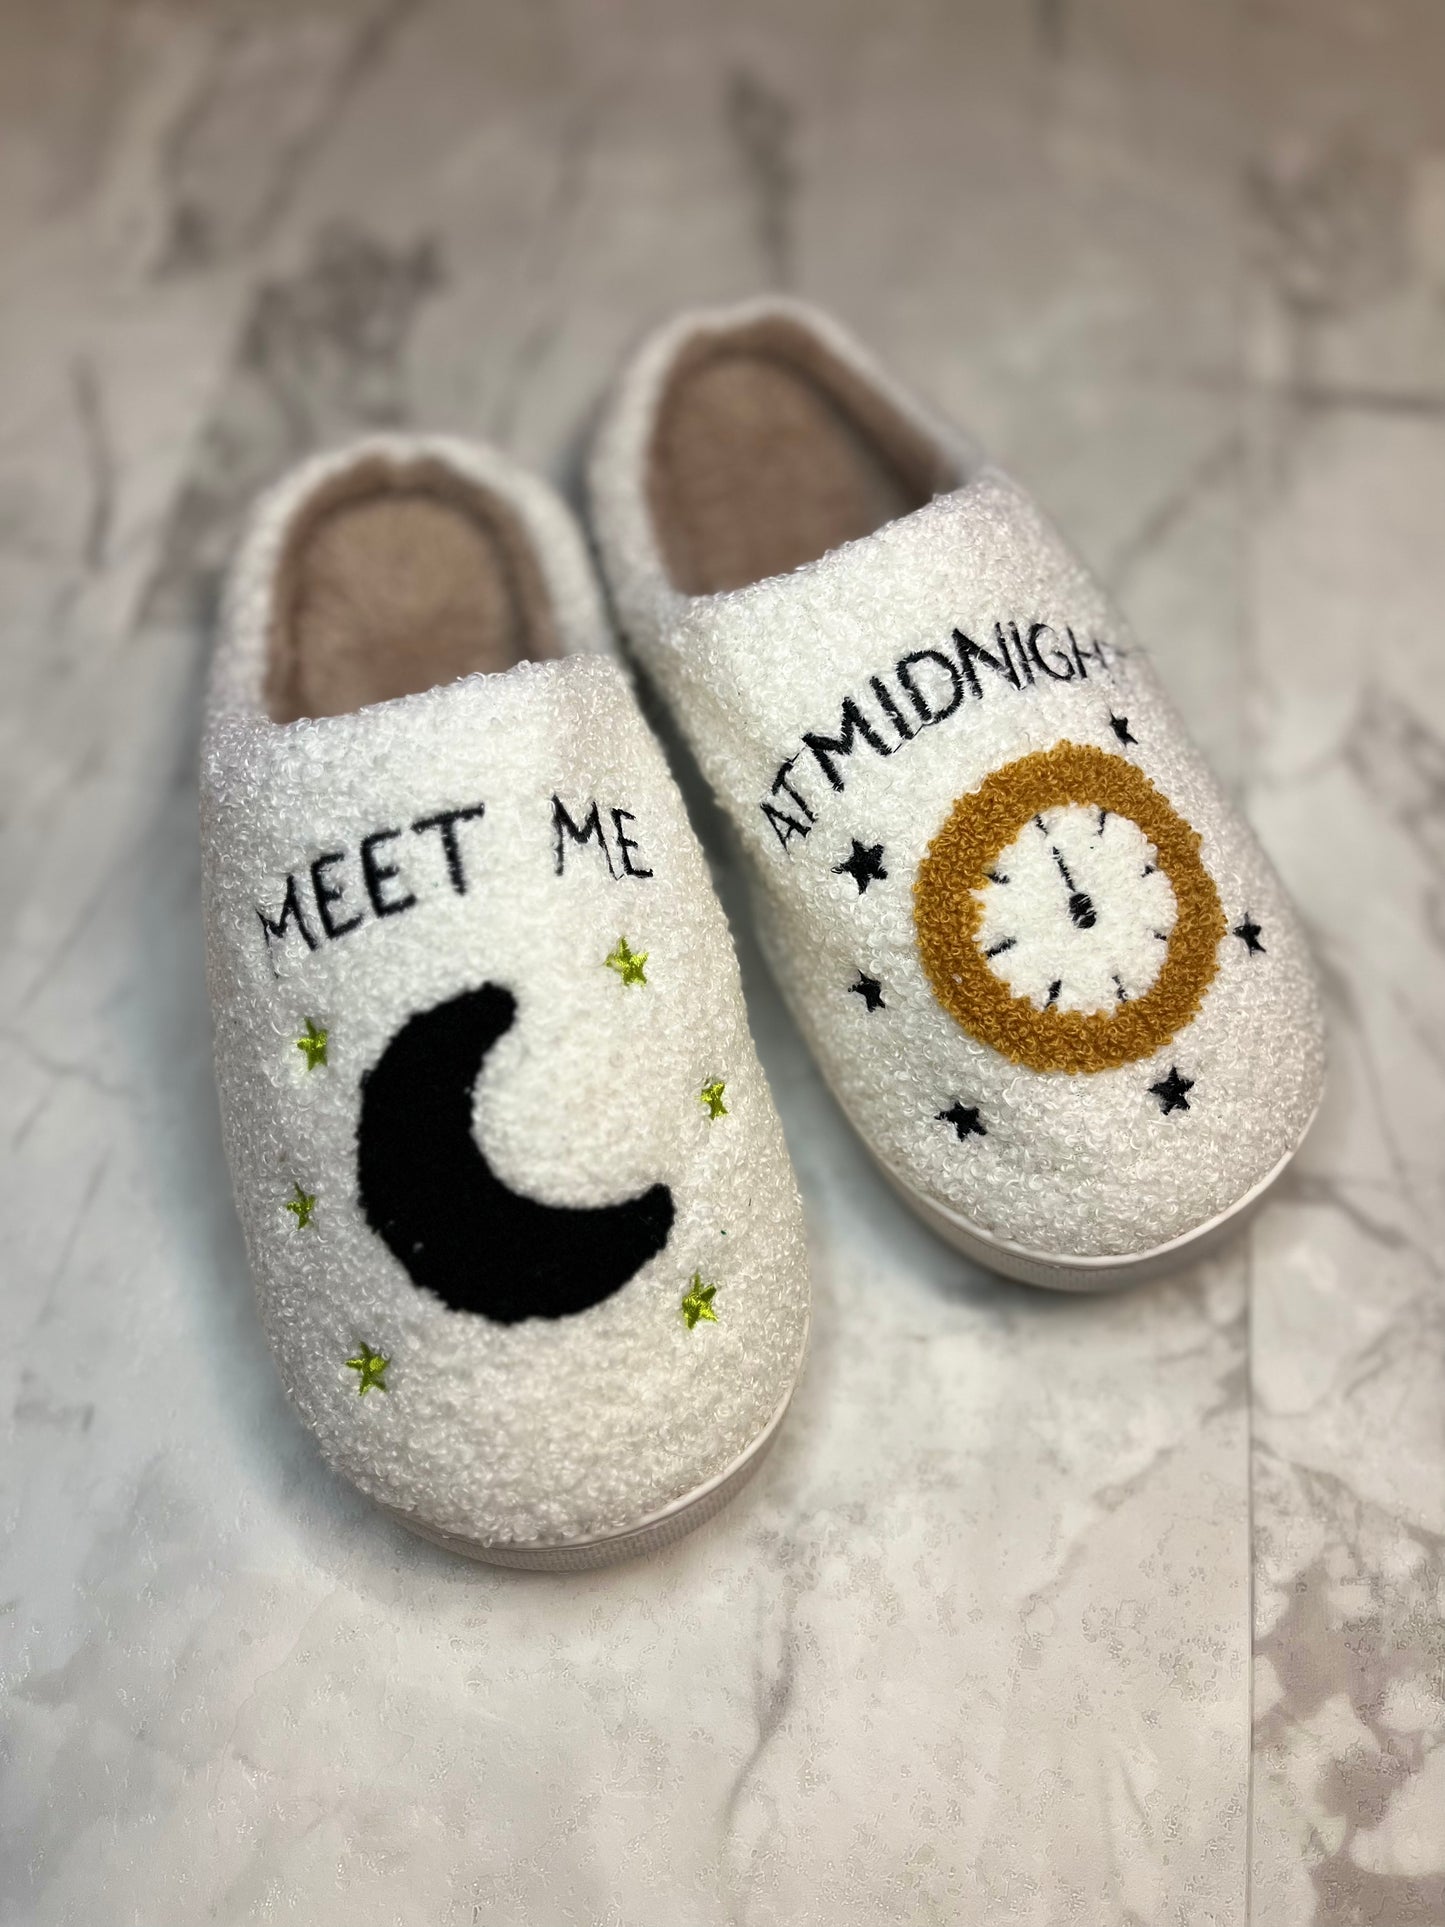 Meet Me at Midnight Slippers, House Shoes, Fuzzy Slippers